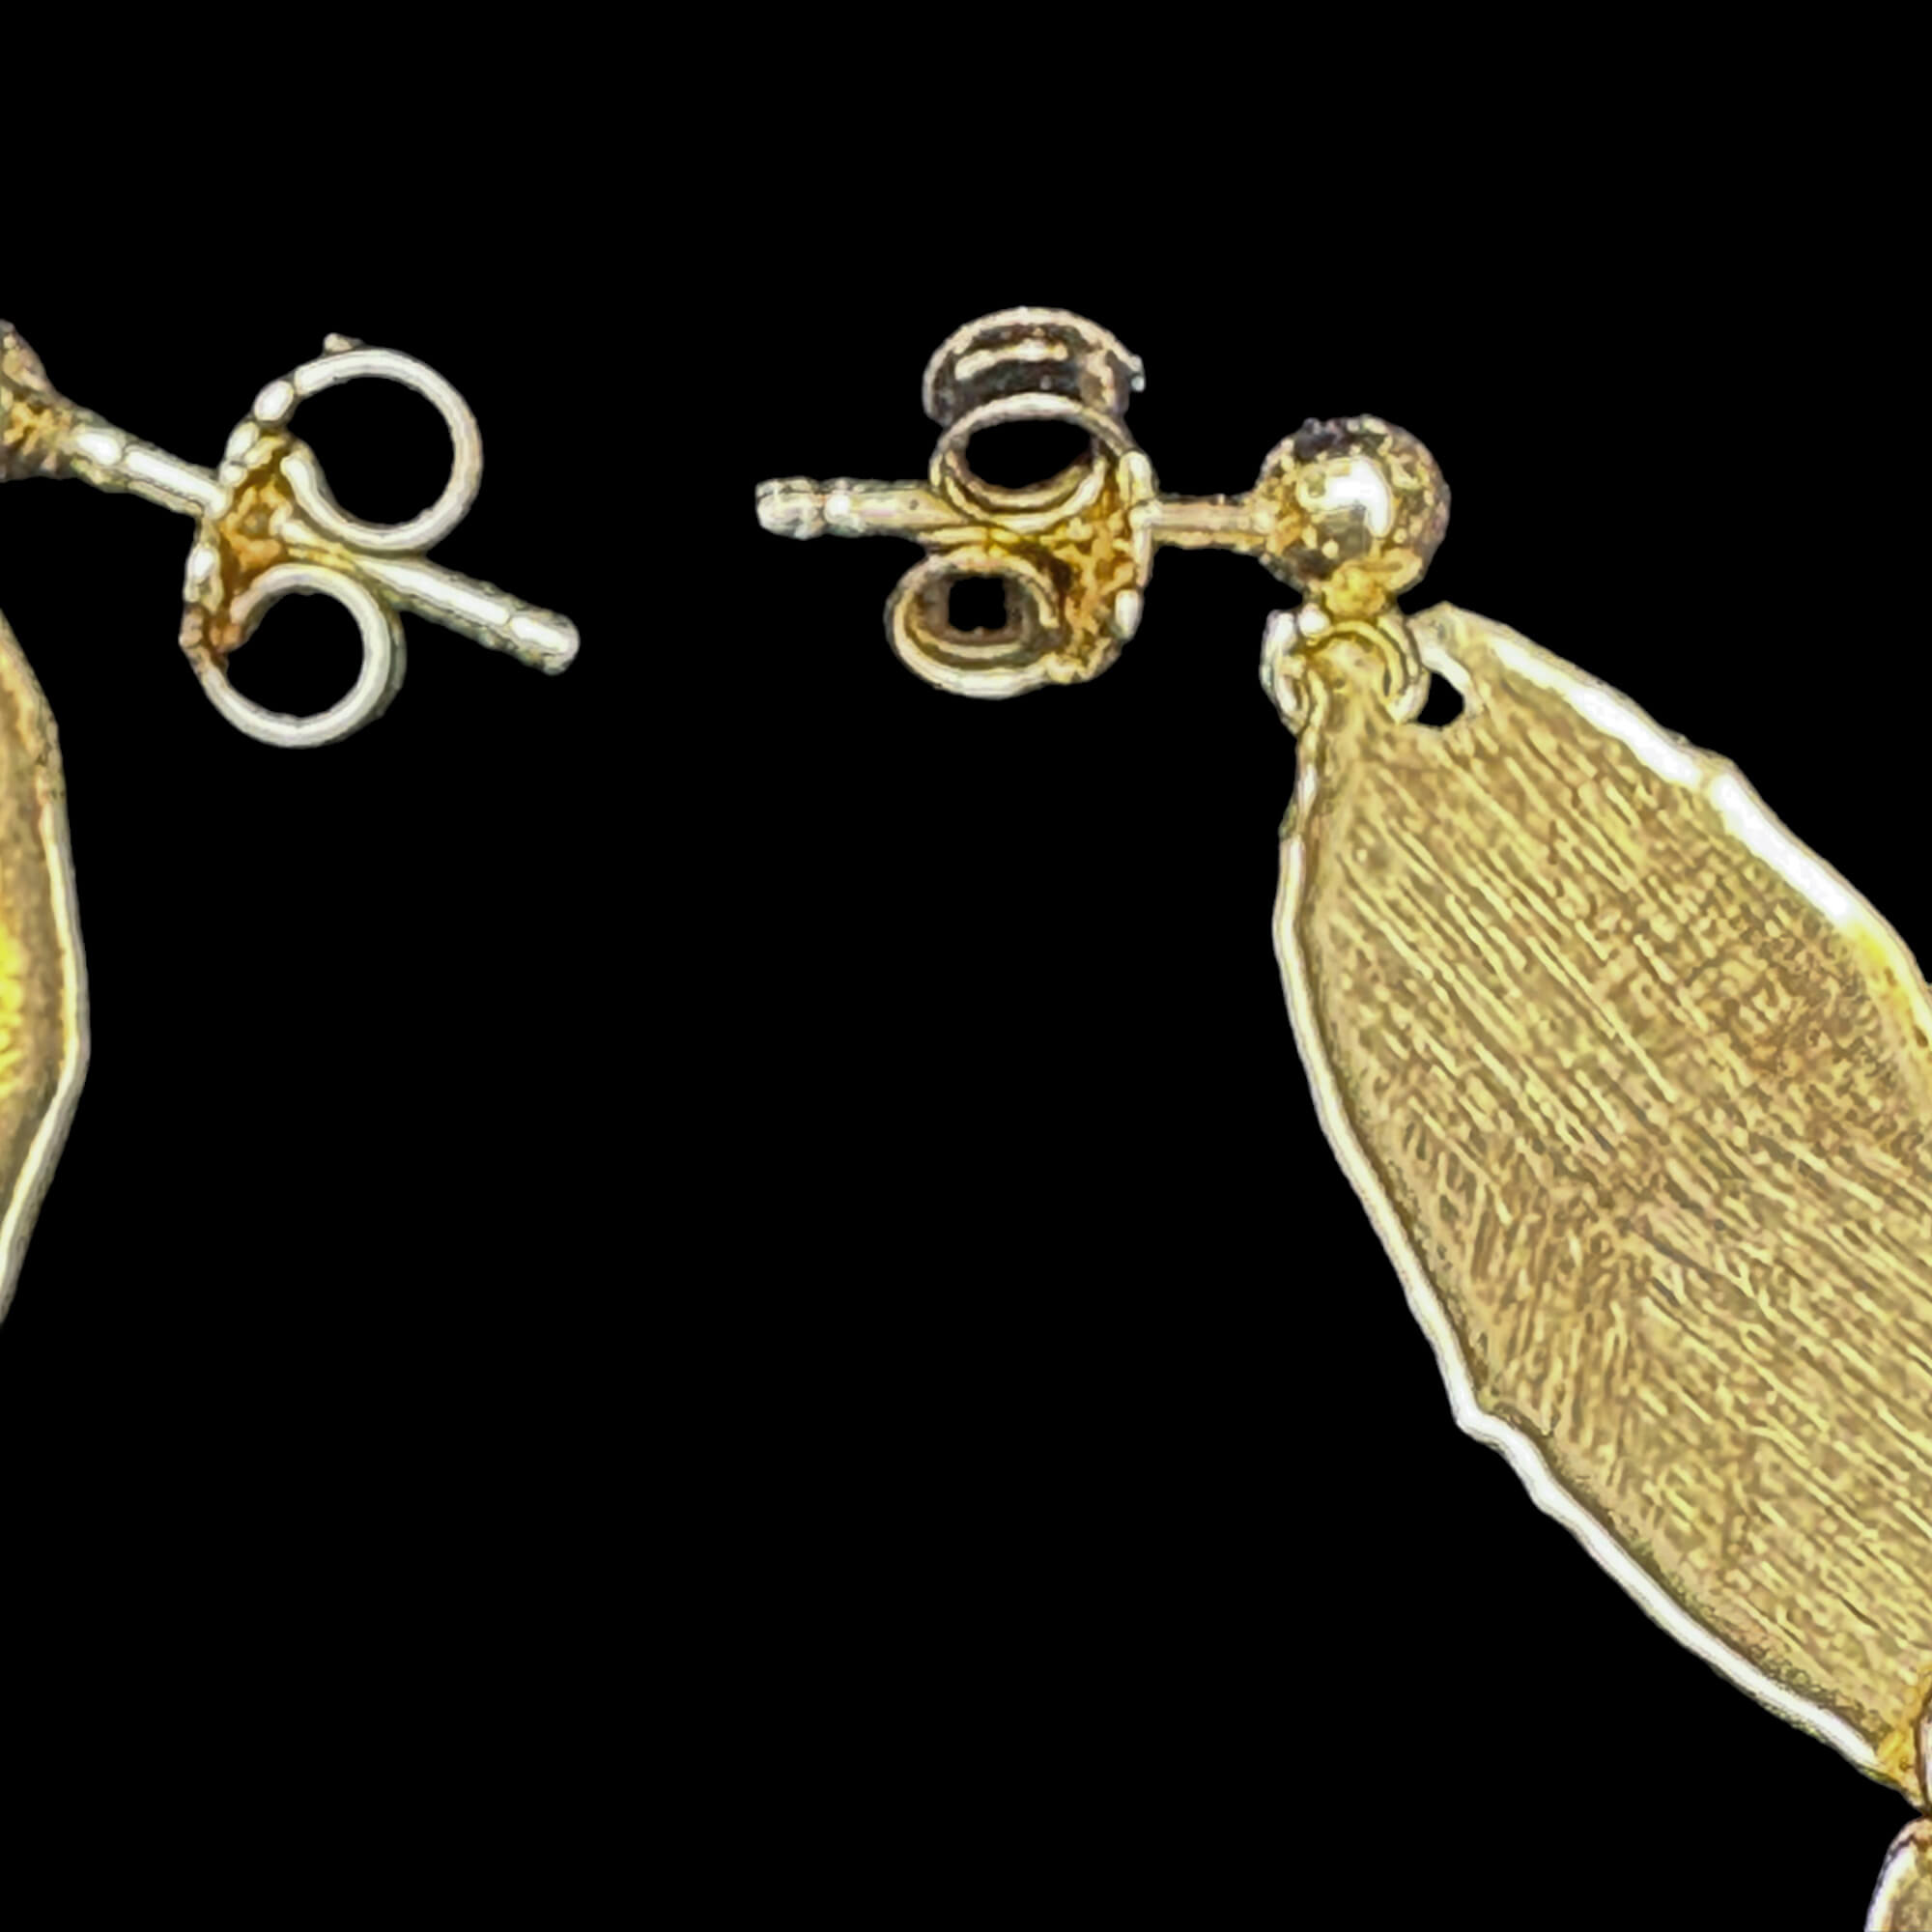 Short gilt silver earrings with oval links